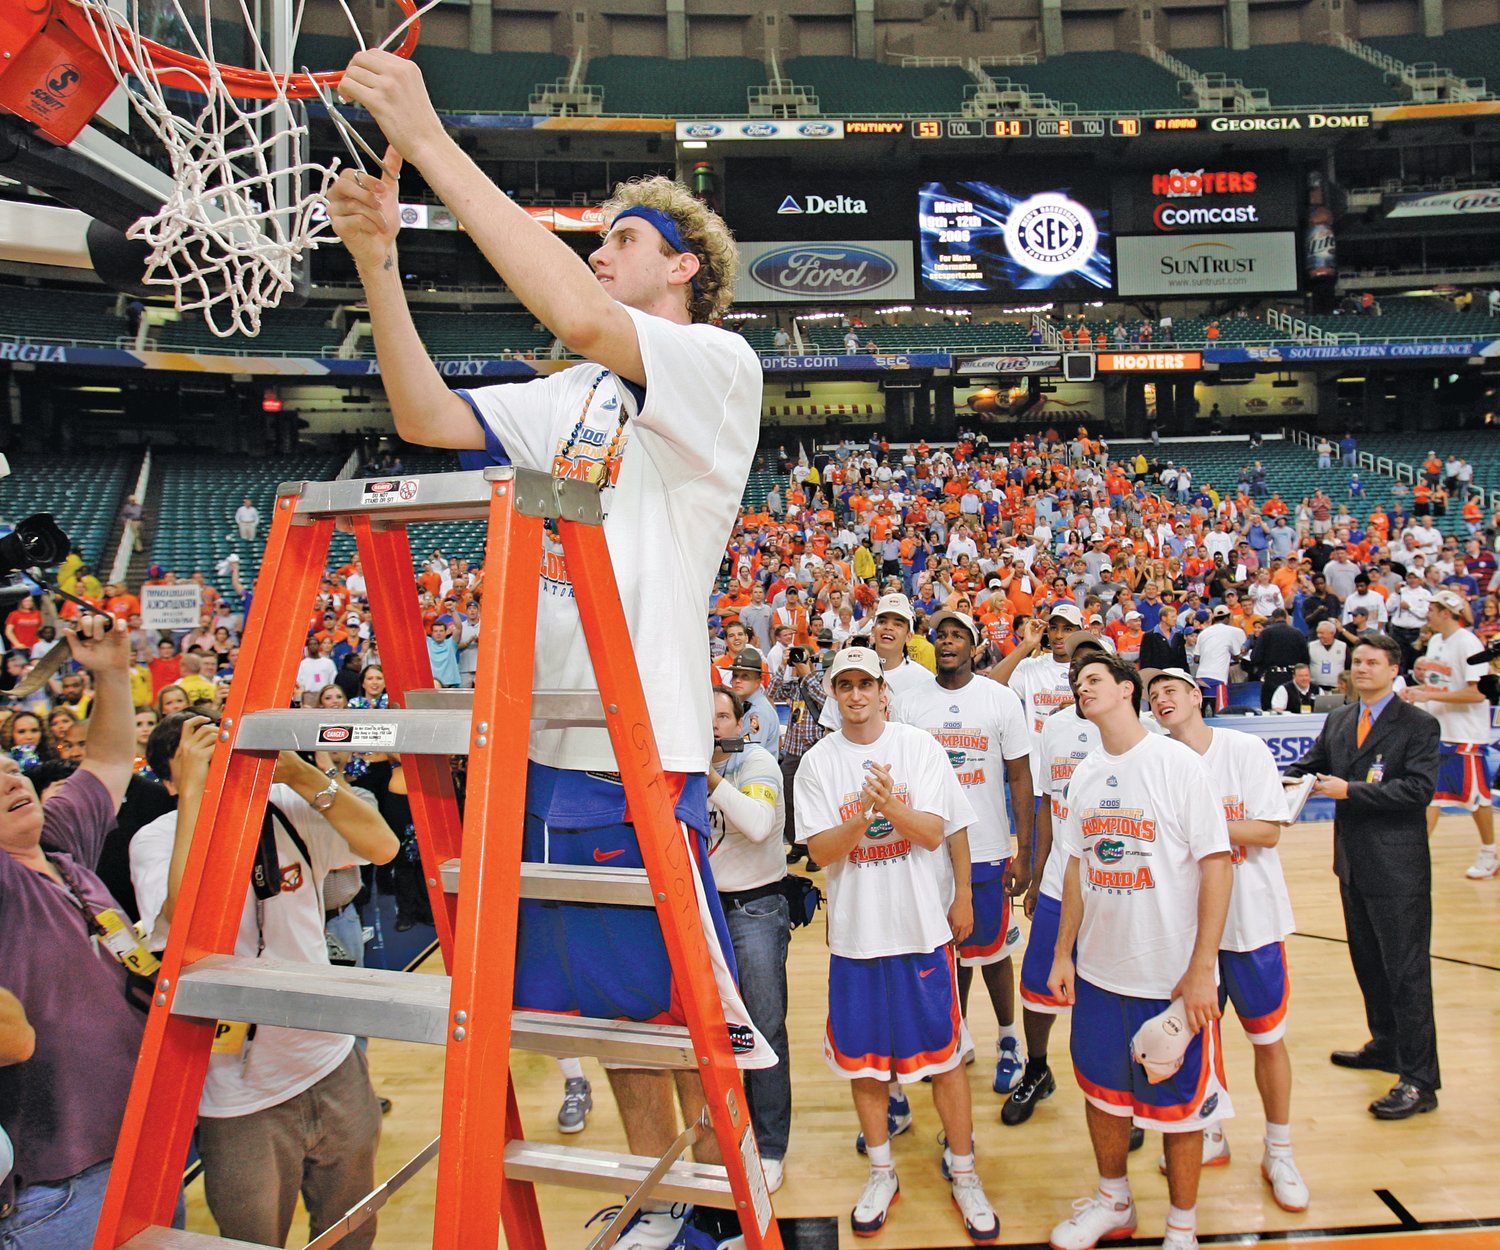 Holland’s Matt Walsh cuts down the net following Florida’s first SEC Tournament Championship in 2005. Walsh was named tournament MVP.